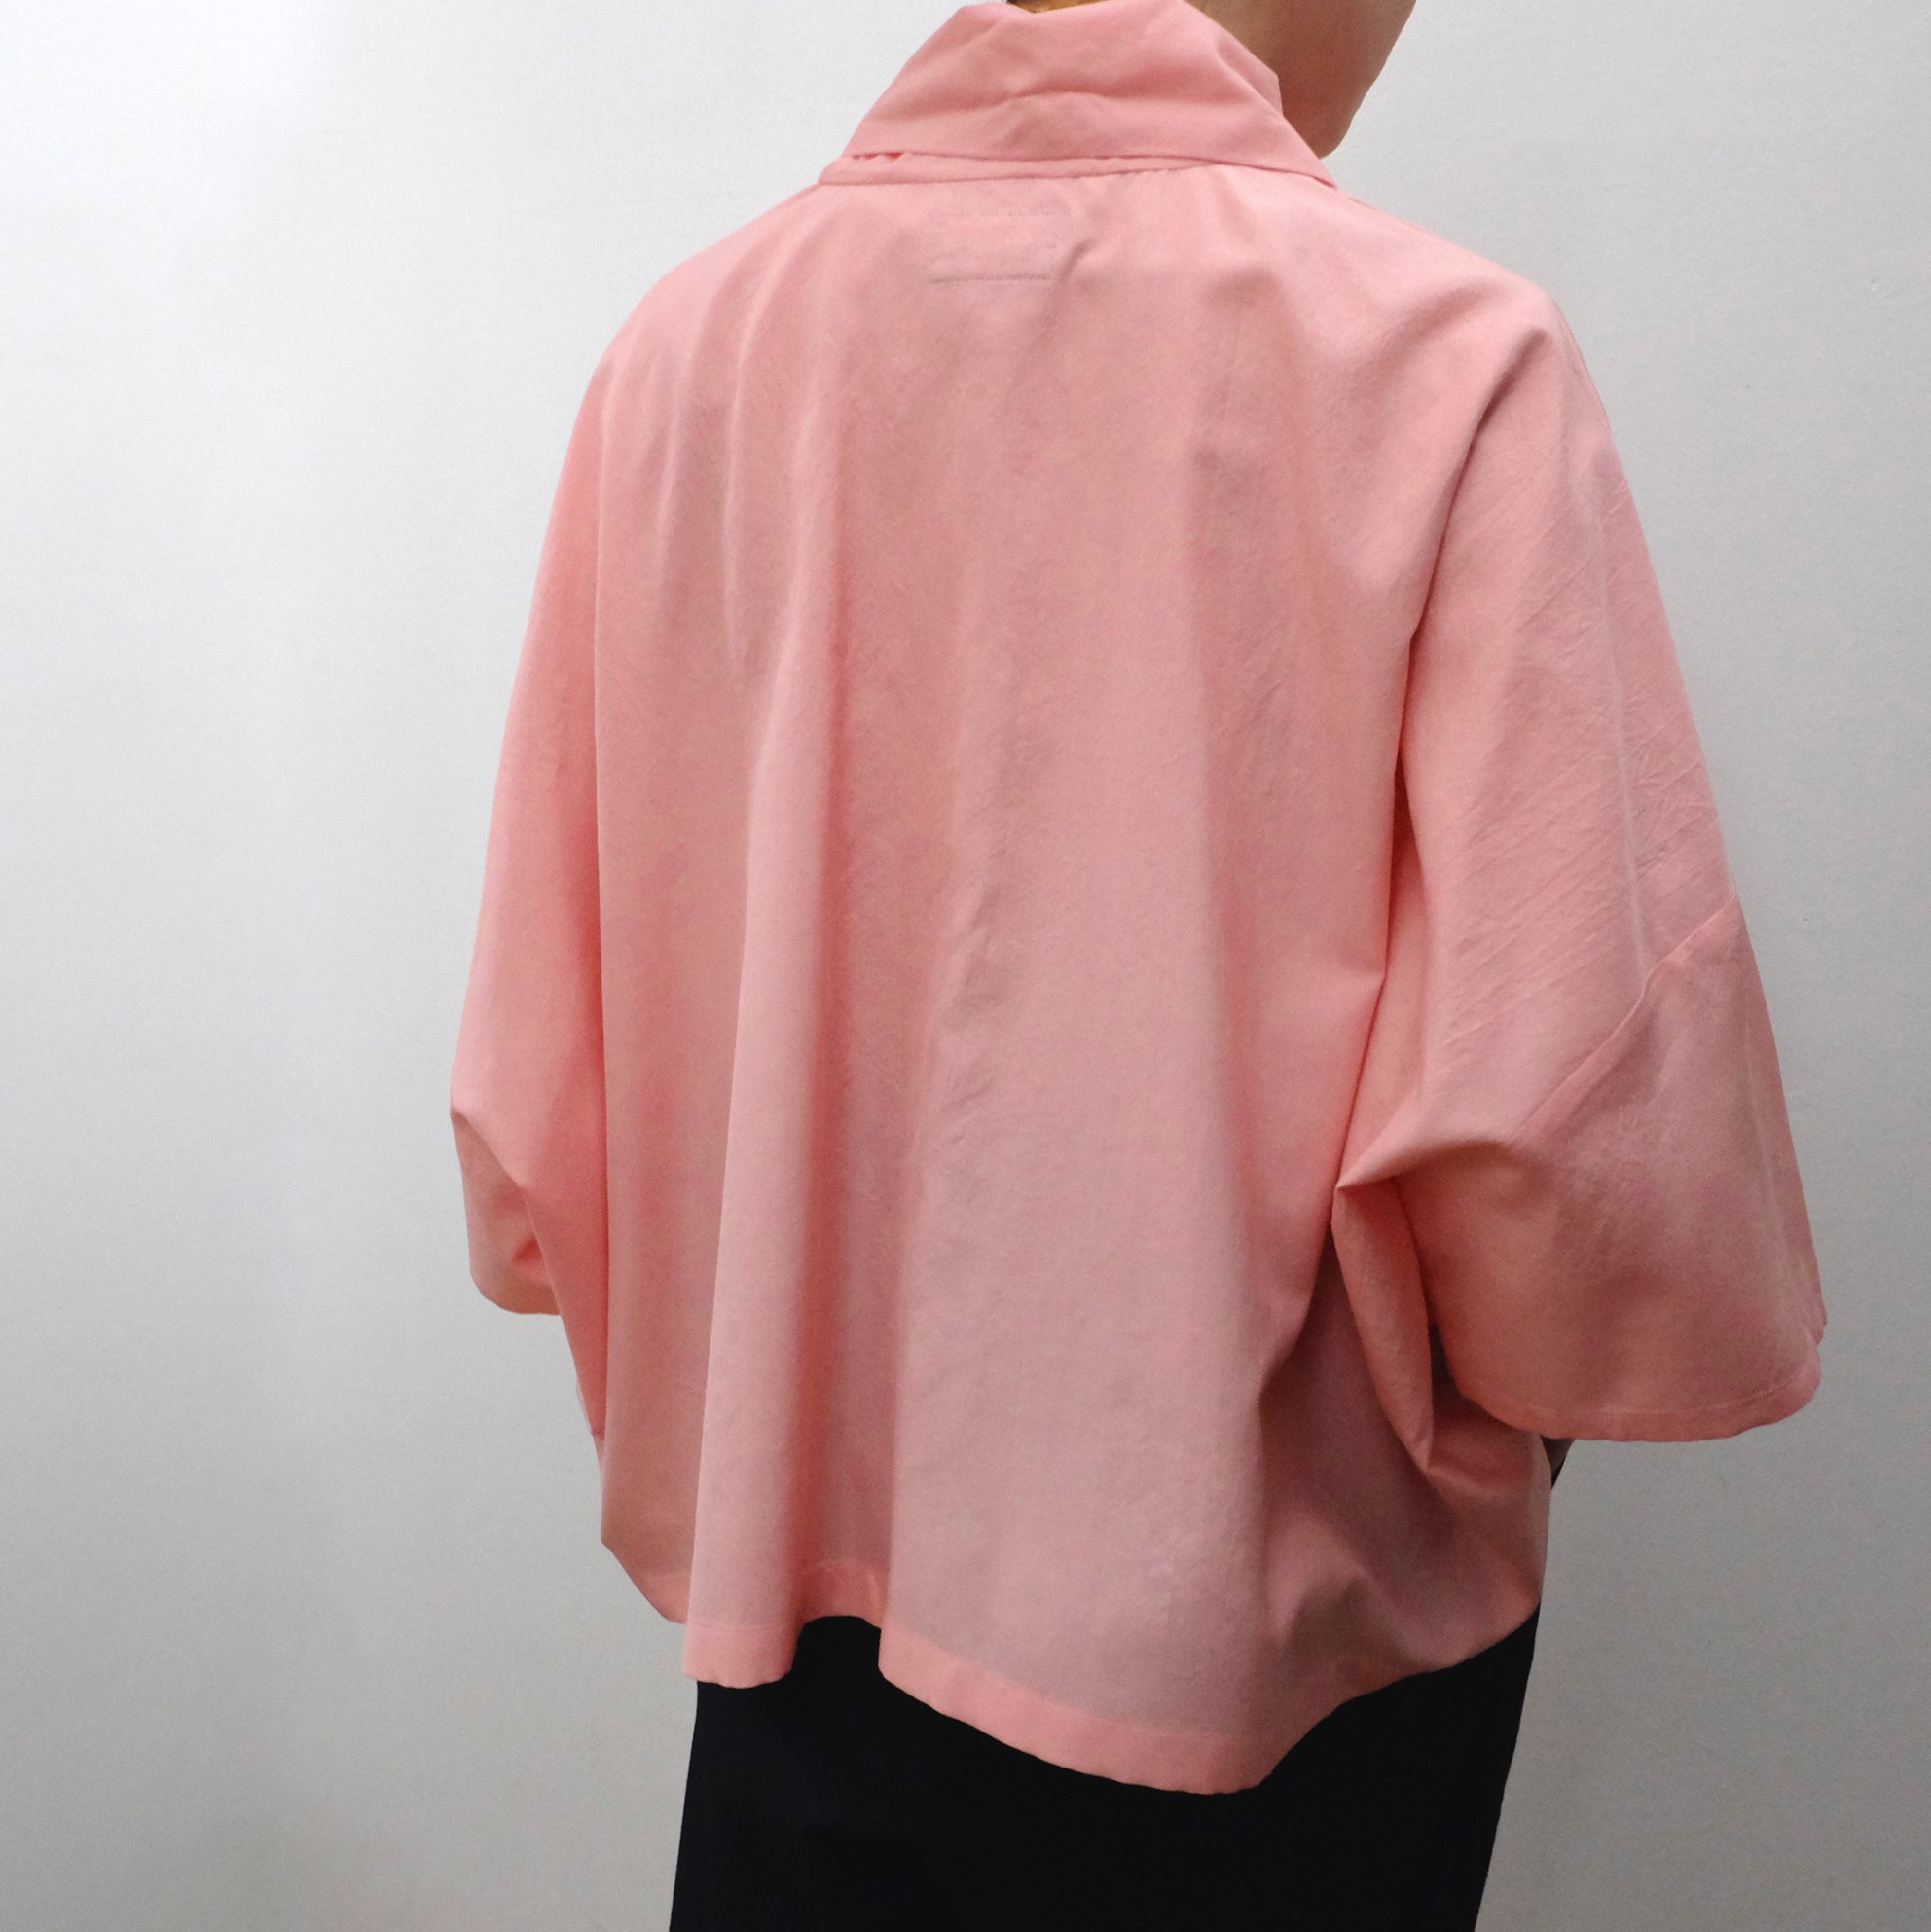 humoresque / bow tie blouse 【JS2207a】 - くるみの木